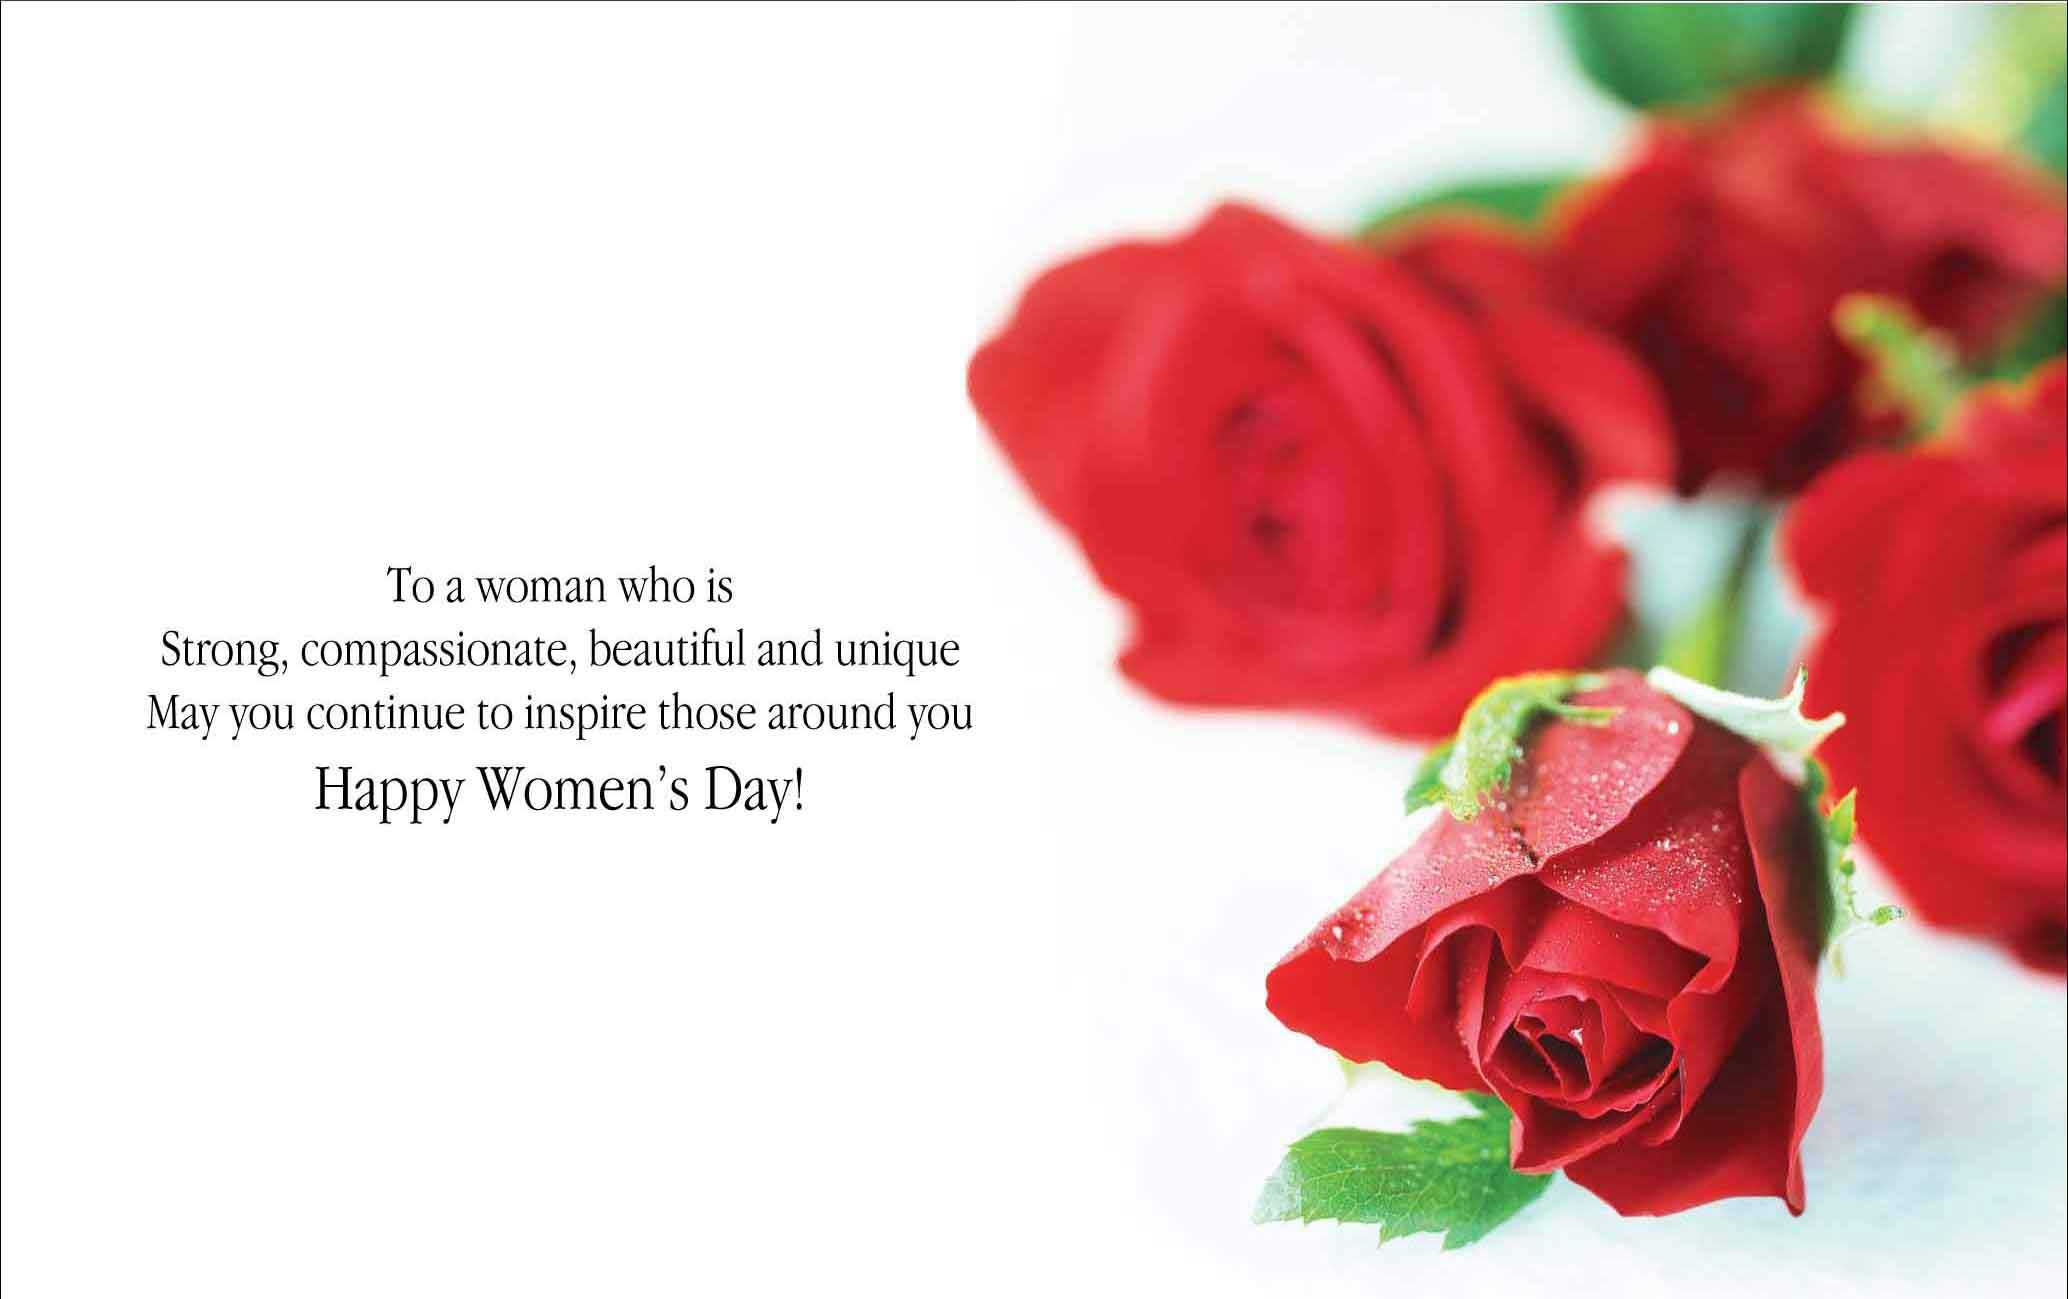 Happy Womens Day Images 2019 (5)